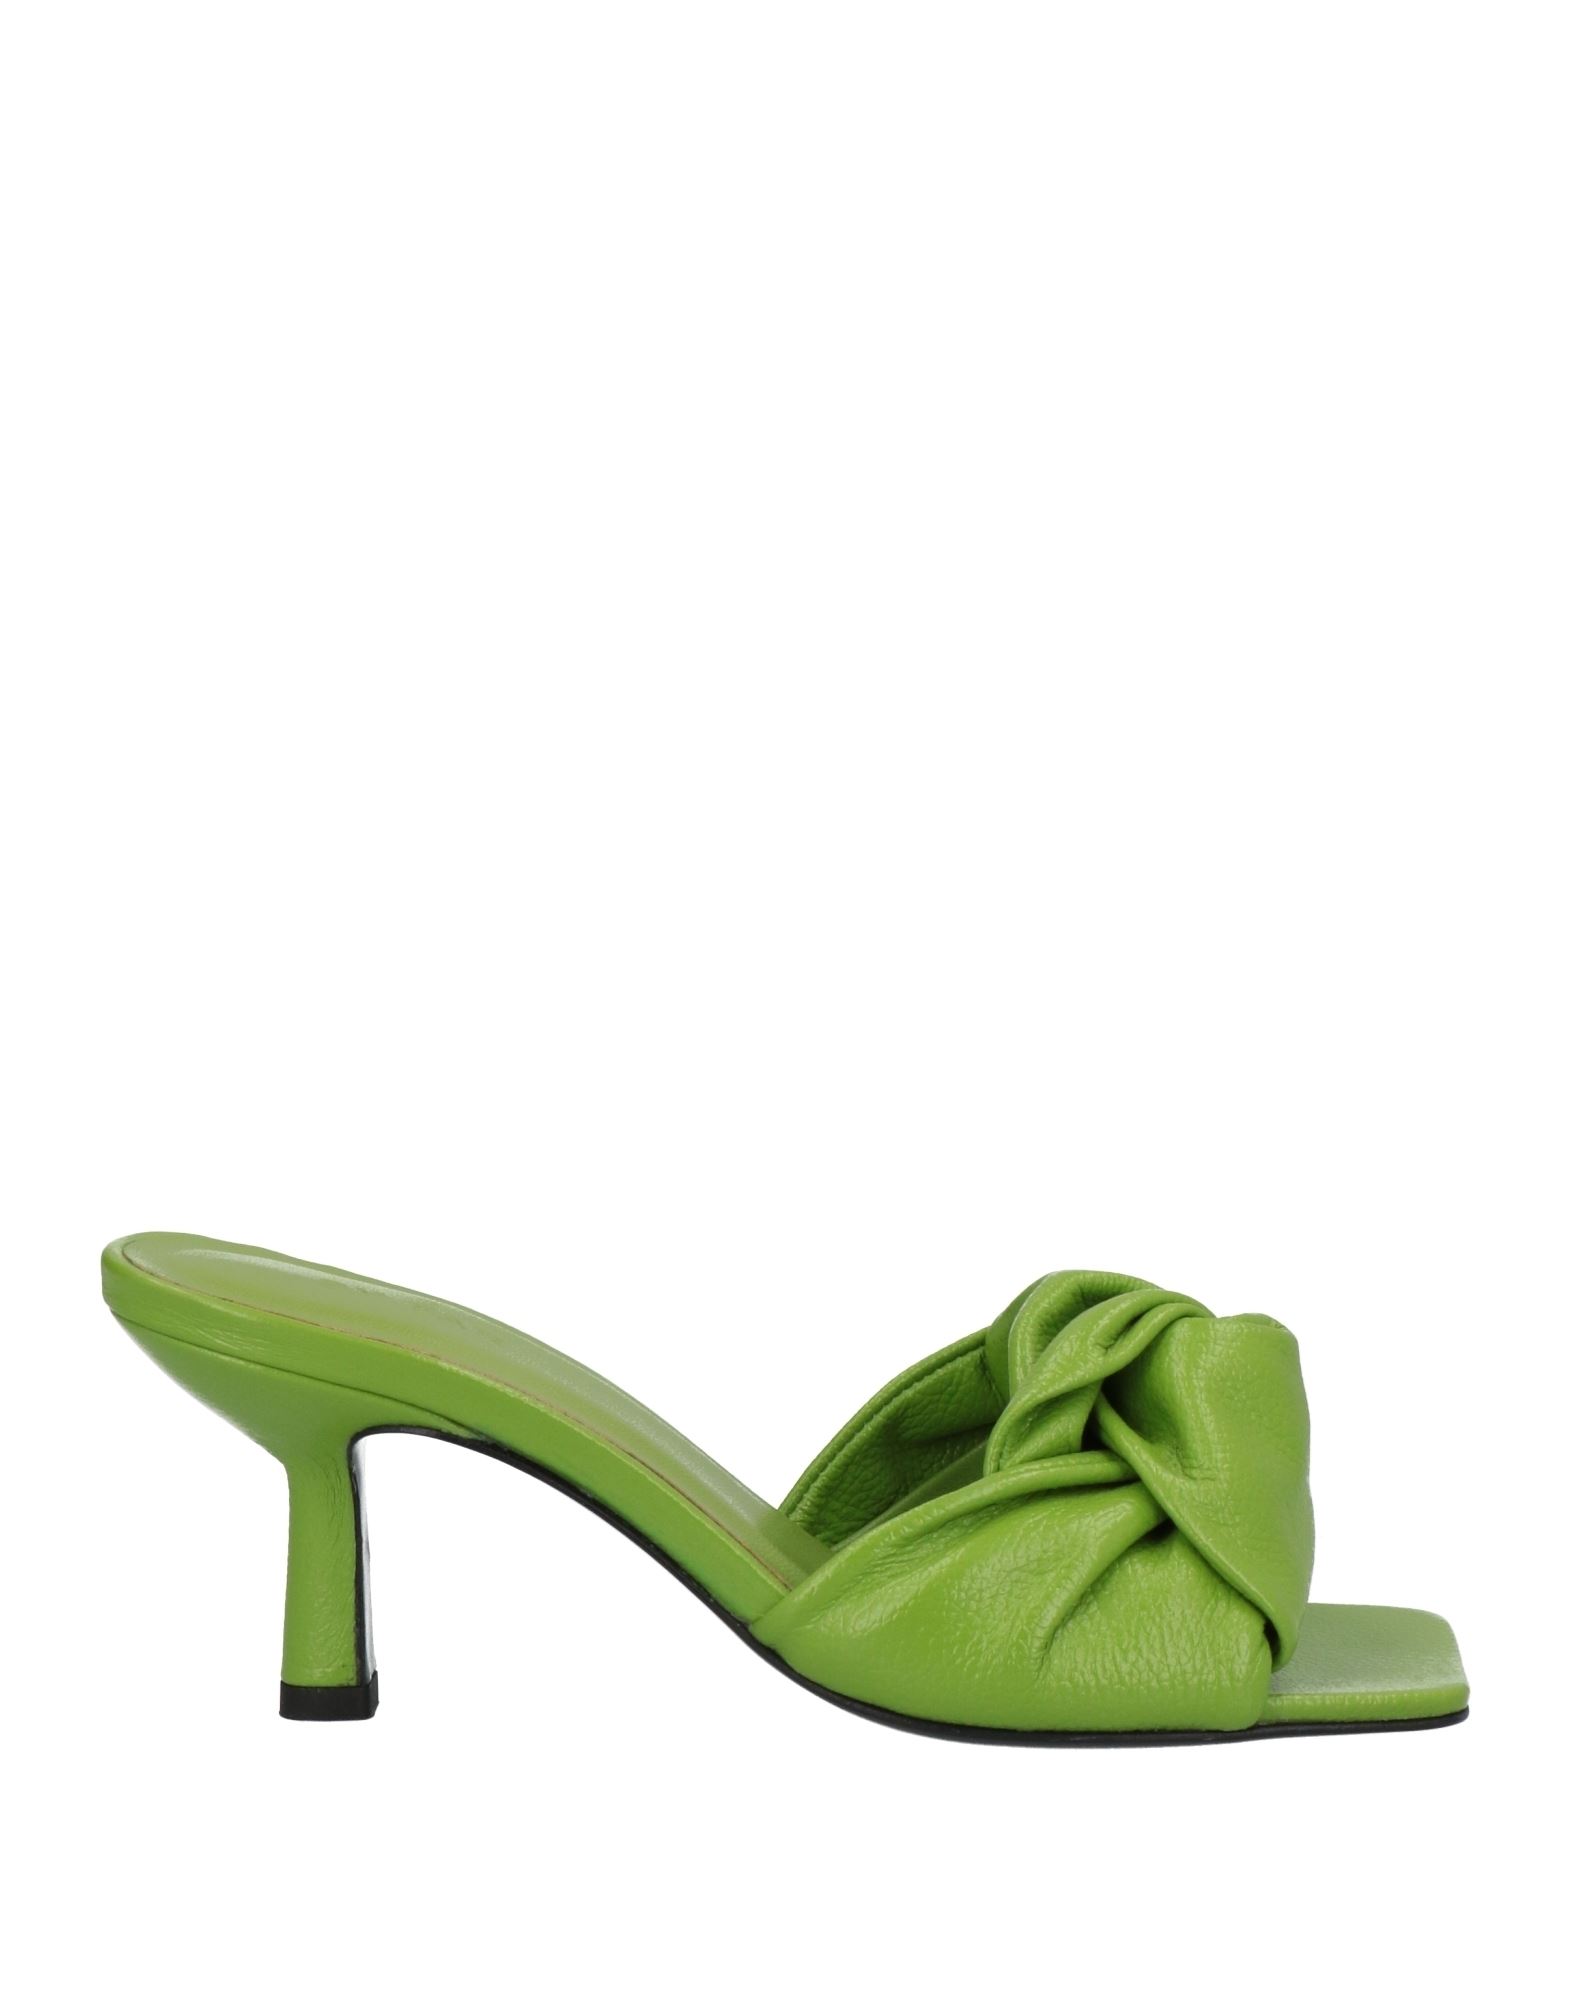 BY FAR BY FAR WOMAN SANDALS ACID GREEN SIZE 7 SOFT LEATHER